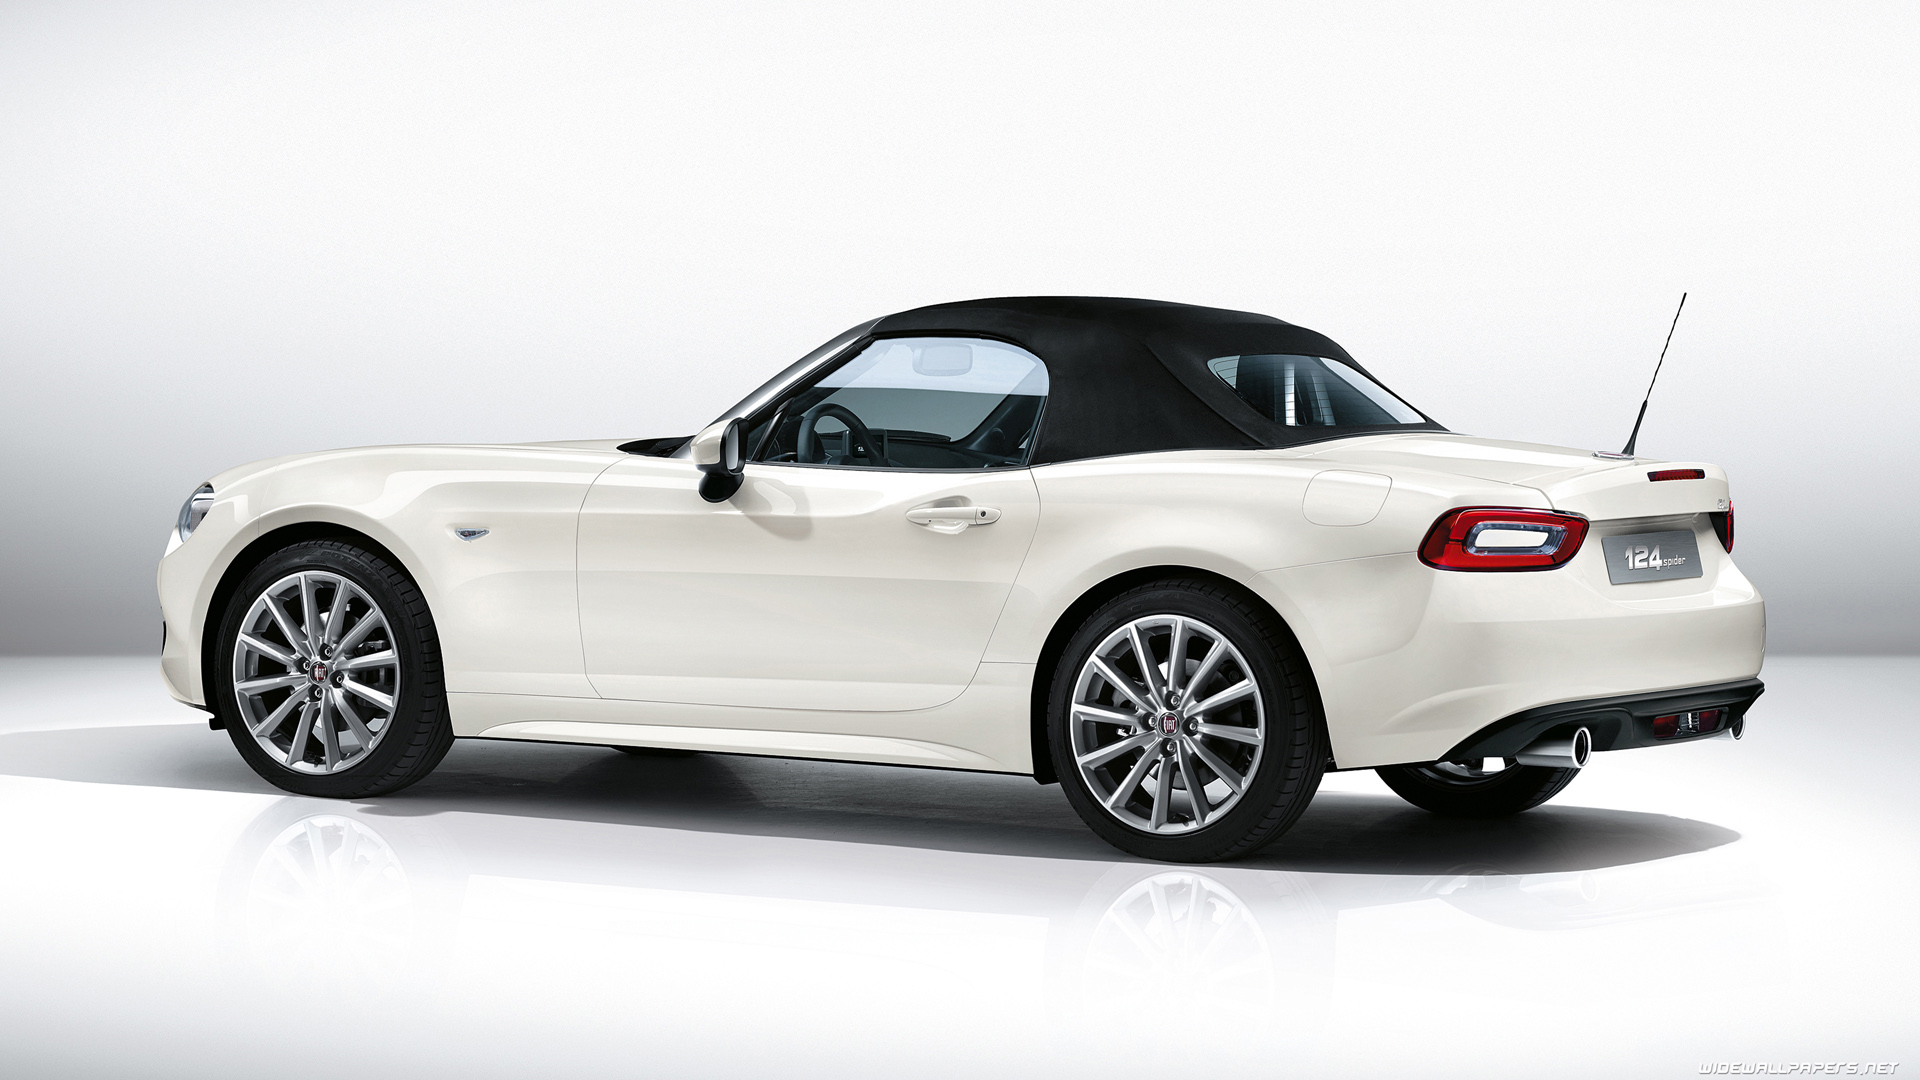 Fiat 124 Spider Cars Desktop Wallpapers Hd And Wide Wallpapers